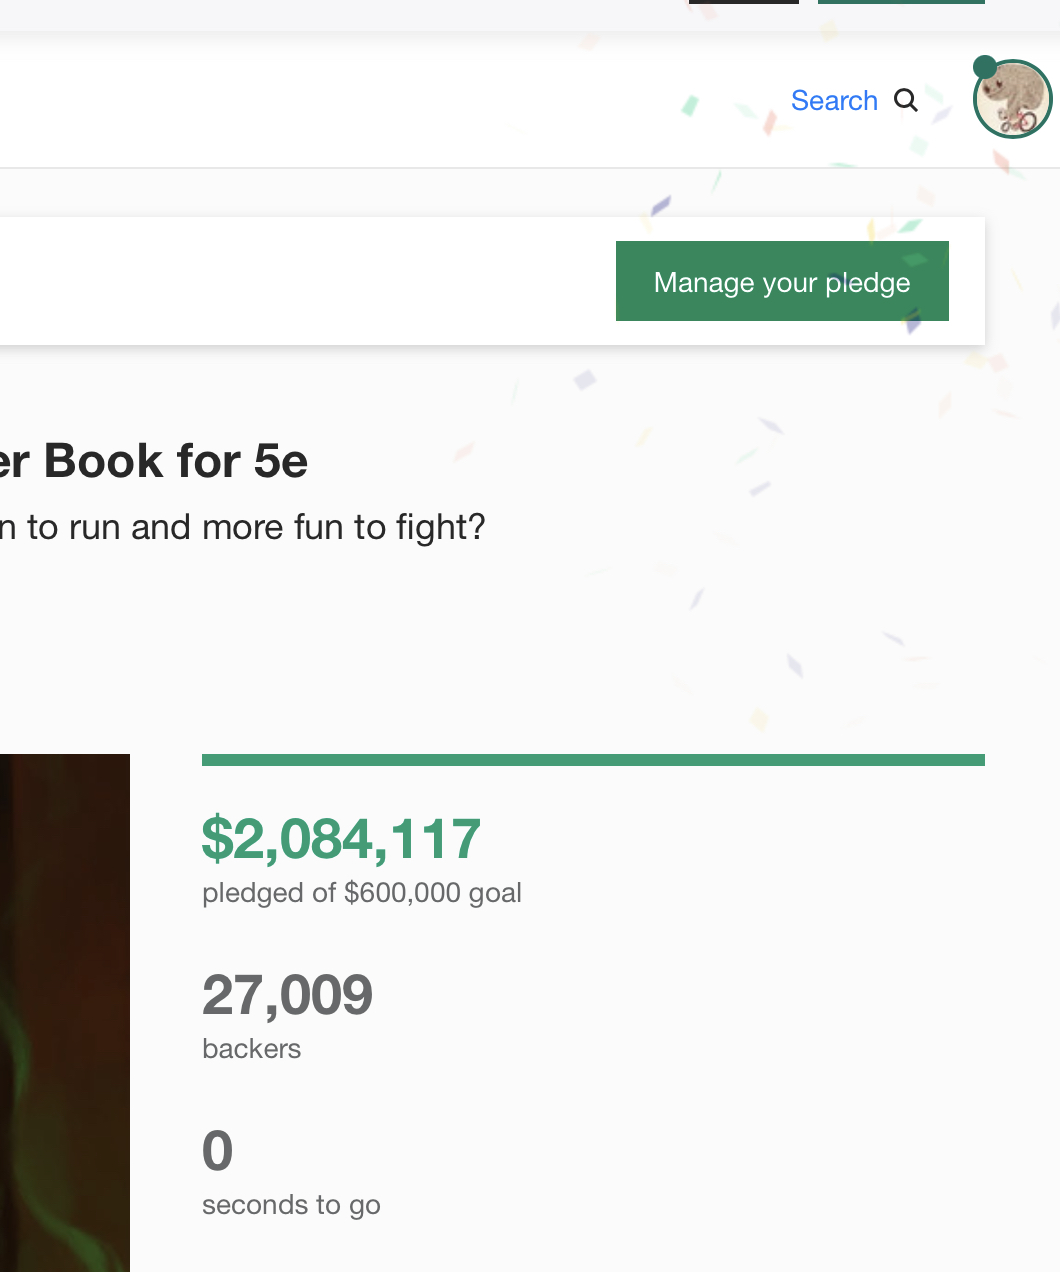 2 million! And 27 thousand backers